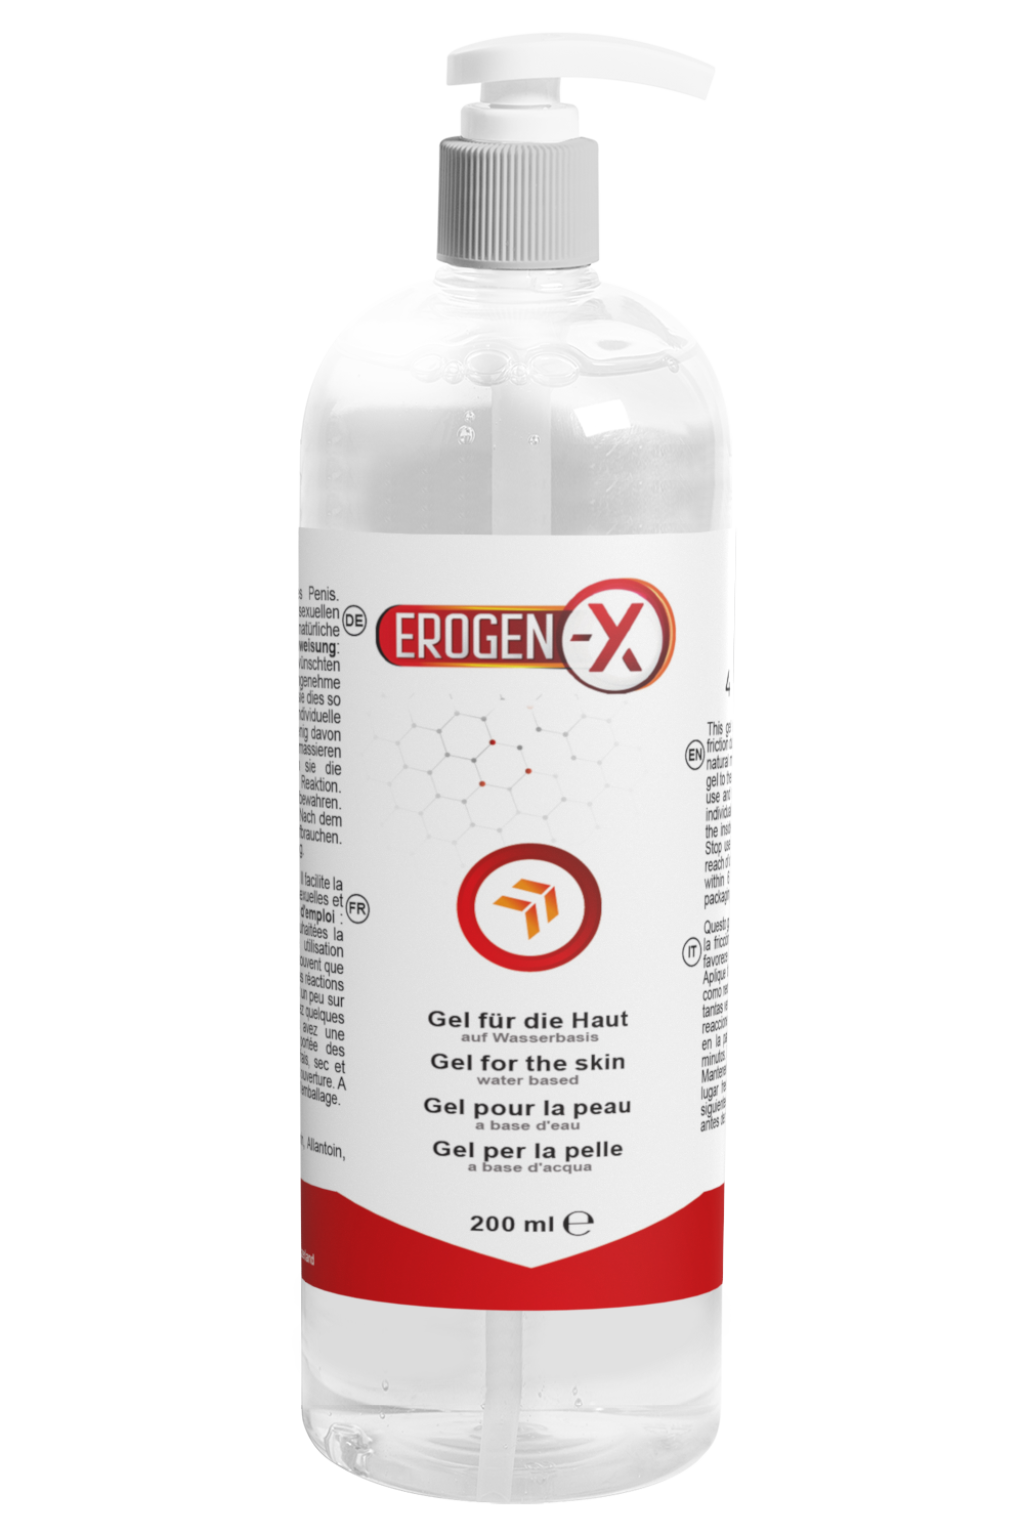 erogen-x-more-than-5-great-reasons-to-use-this-gel